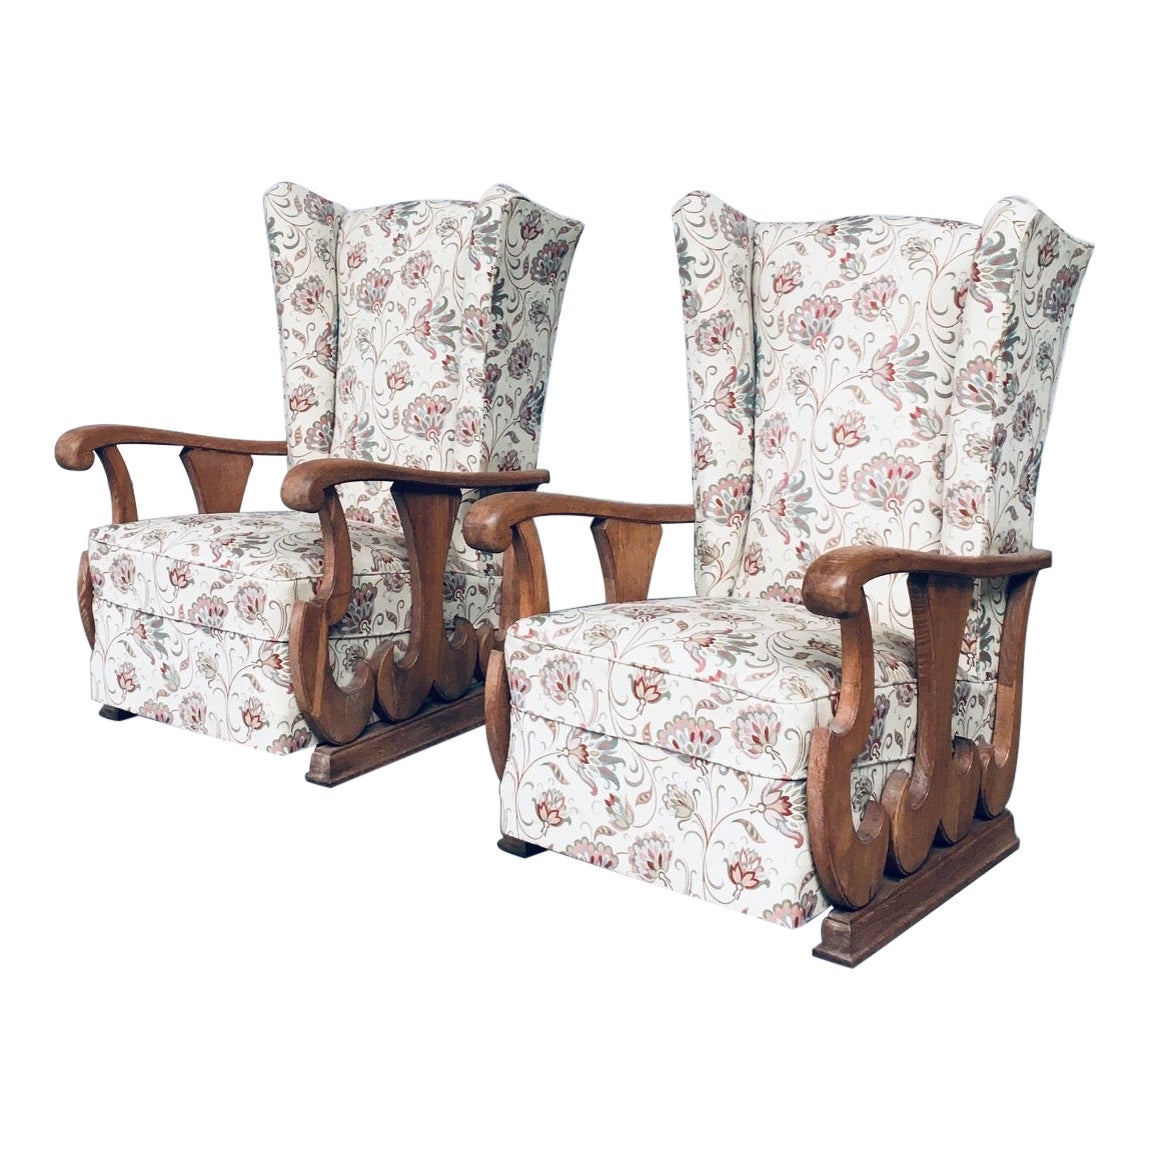 Early 1900's Design High Wing Back Armchair Fauteuil Set For Sale